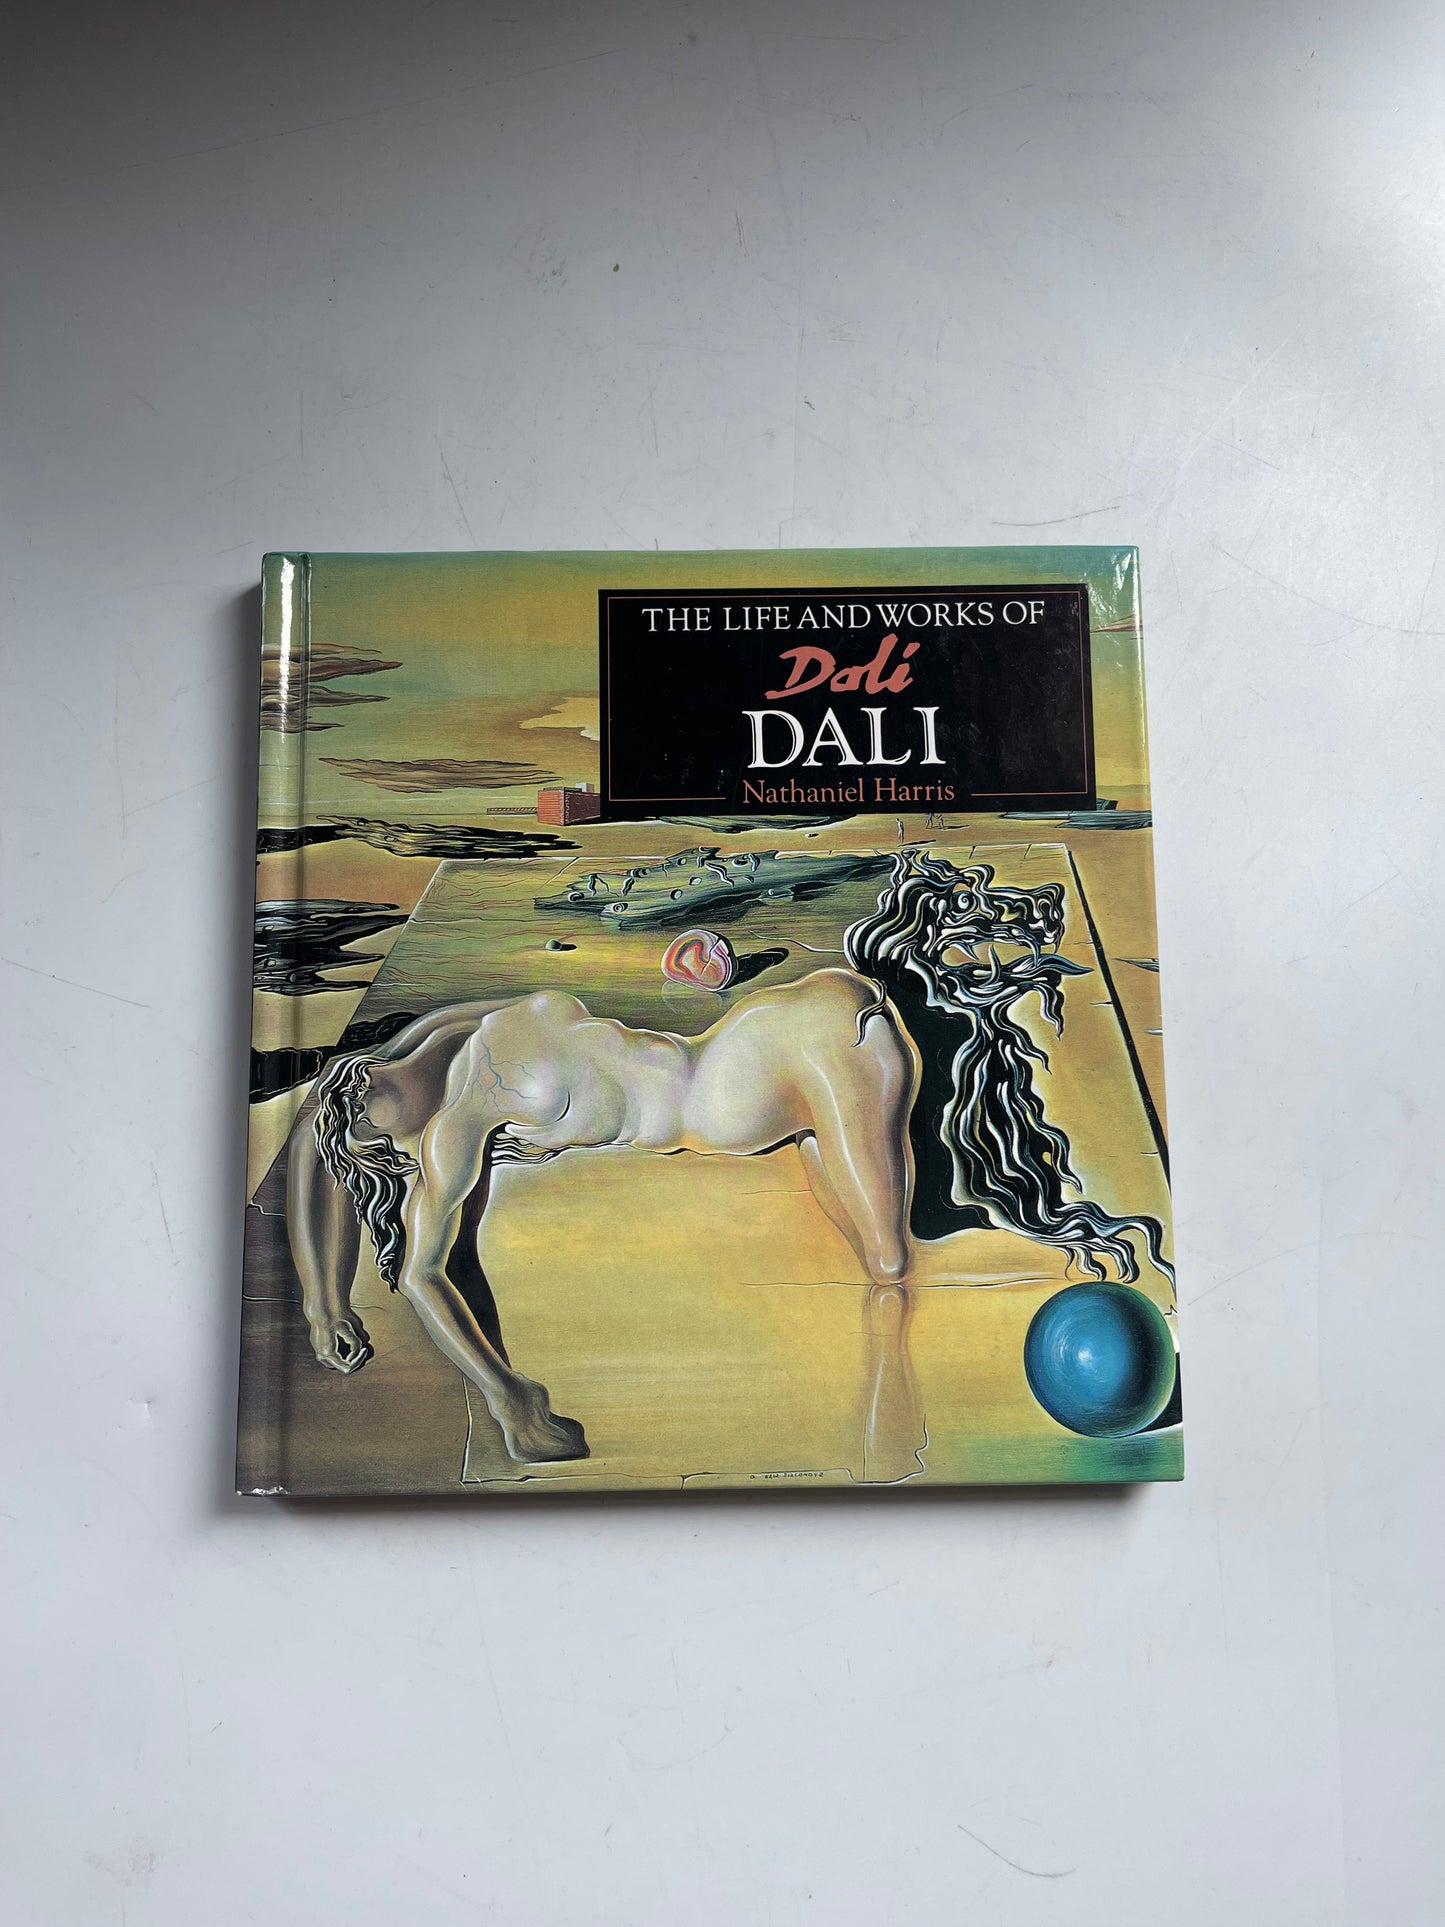 The Life and Works of Dali by Nathaniel Harris 8 1/2" x 8"